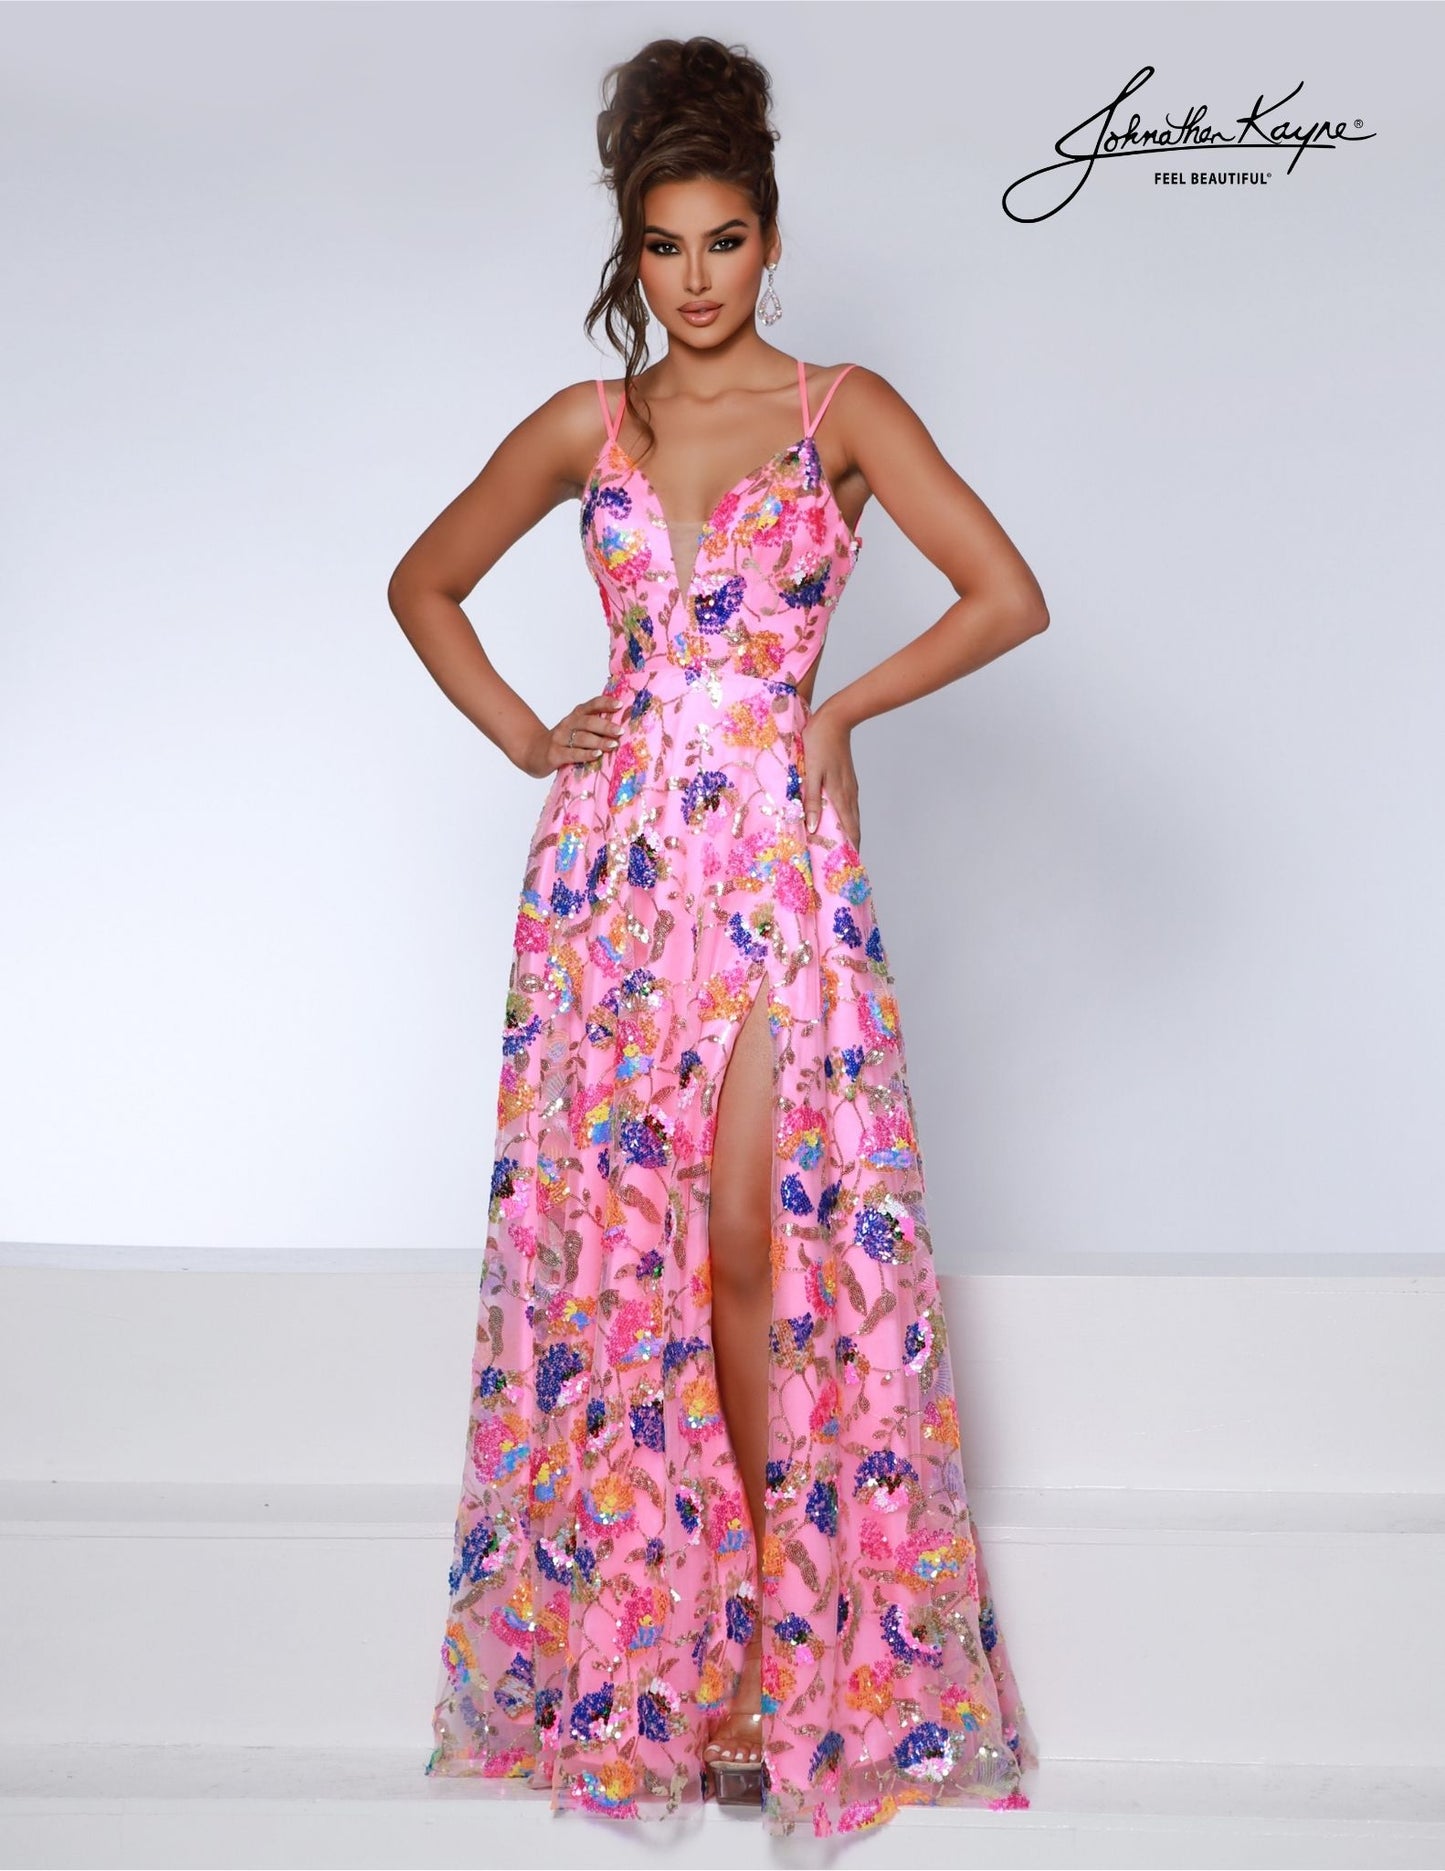 Johnathan Kayne 2813 is an elegant long prom dress featuring a plunging V-neckline, an open back with a slit, and sparkling sequin and beaded accents. Be the belle of the ball in this timeless and sophisticated formal gown.